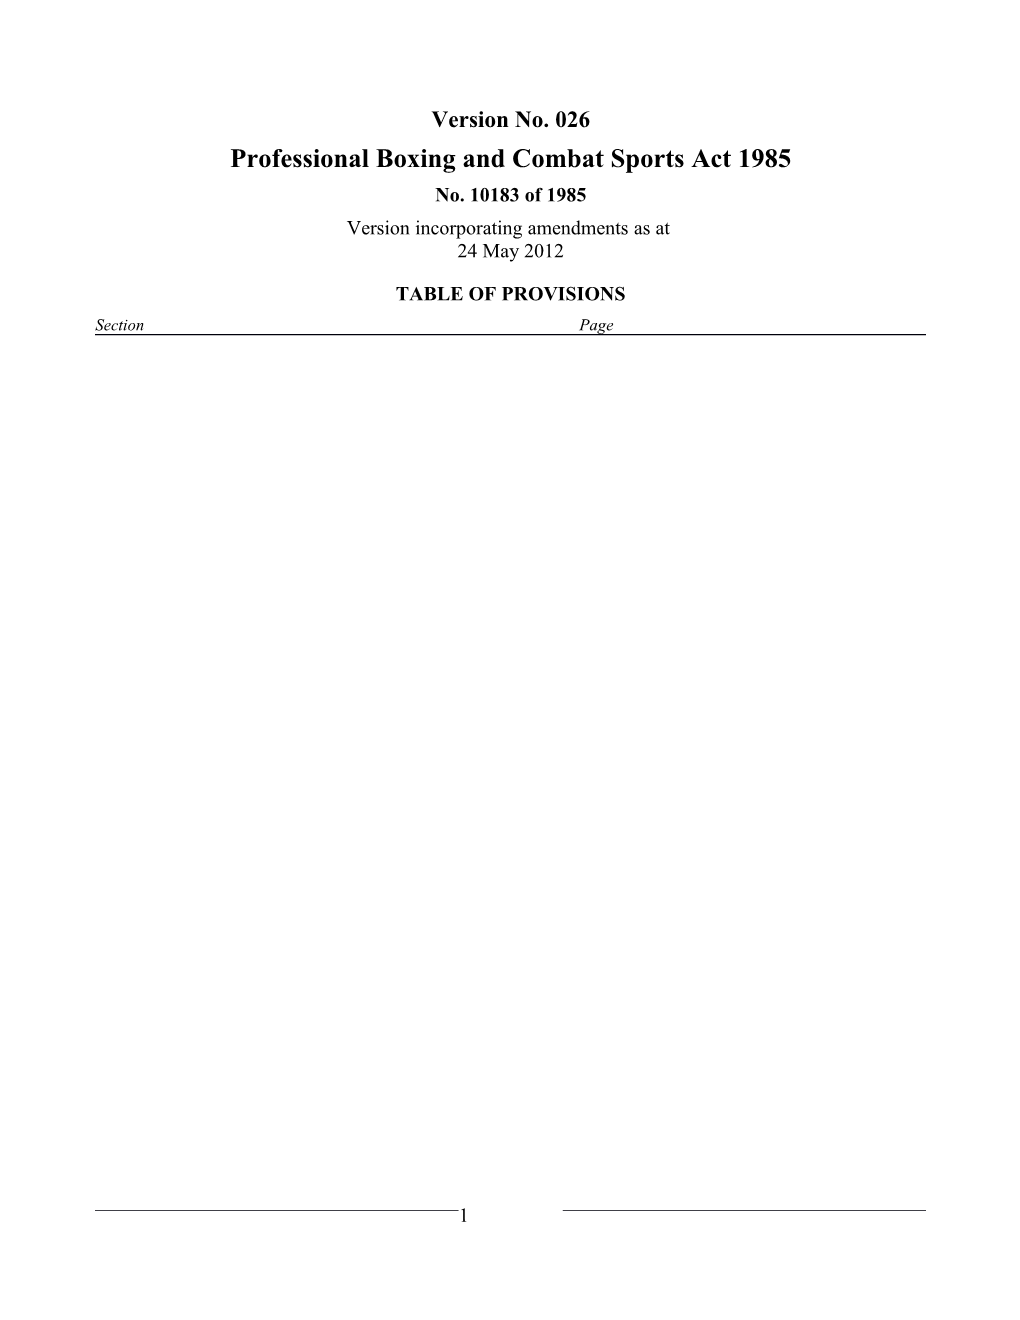 Professional Boxing and Combat Sports Act 1985